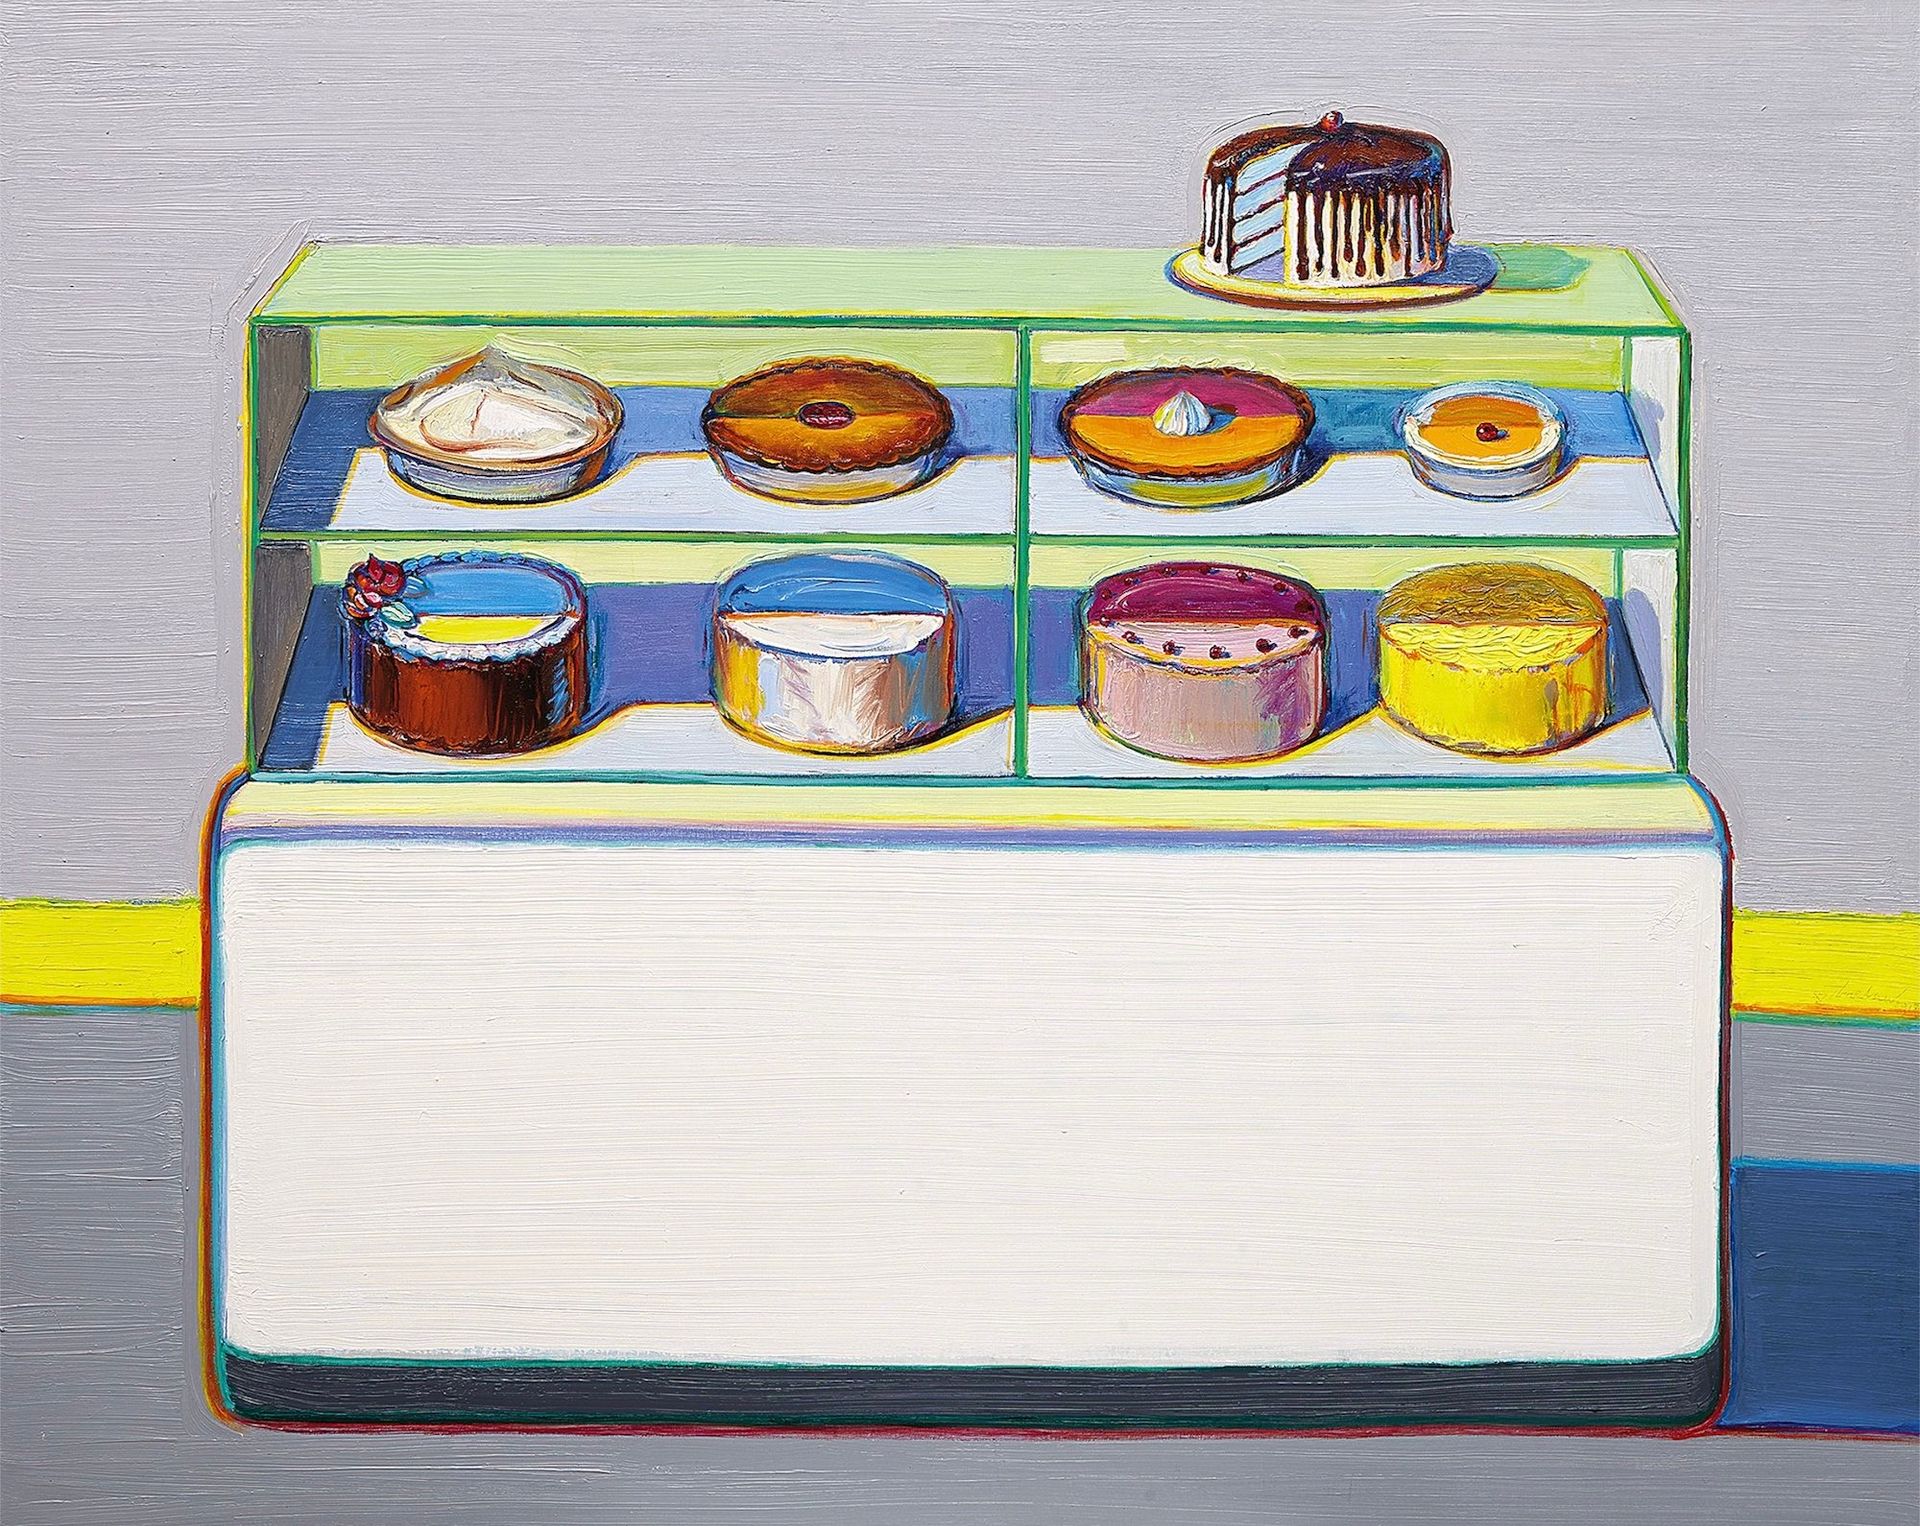 Wayne Thiebaud, Cold Case (2010/2011/2013), Private Collection, courtesy Acquavella Galleries Art © Wayne Thiebaud / Licensed by VAGA, New York, NY